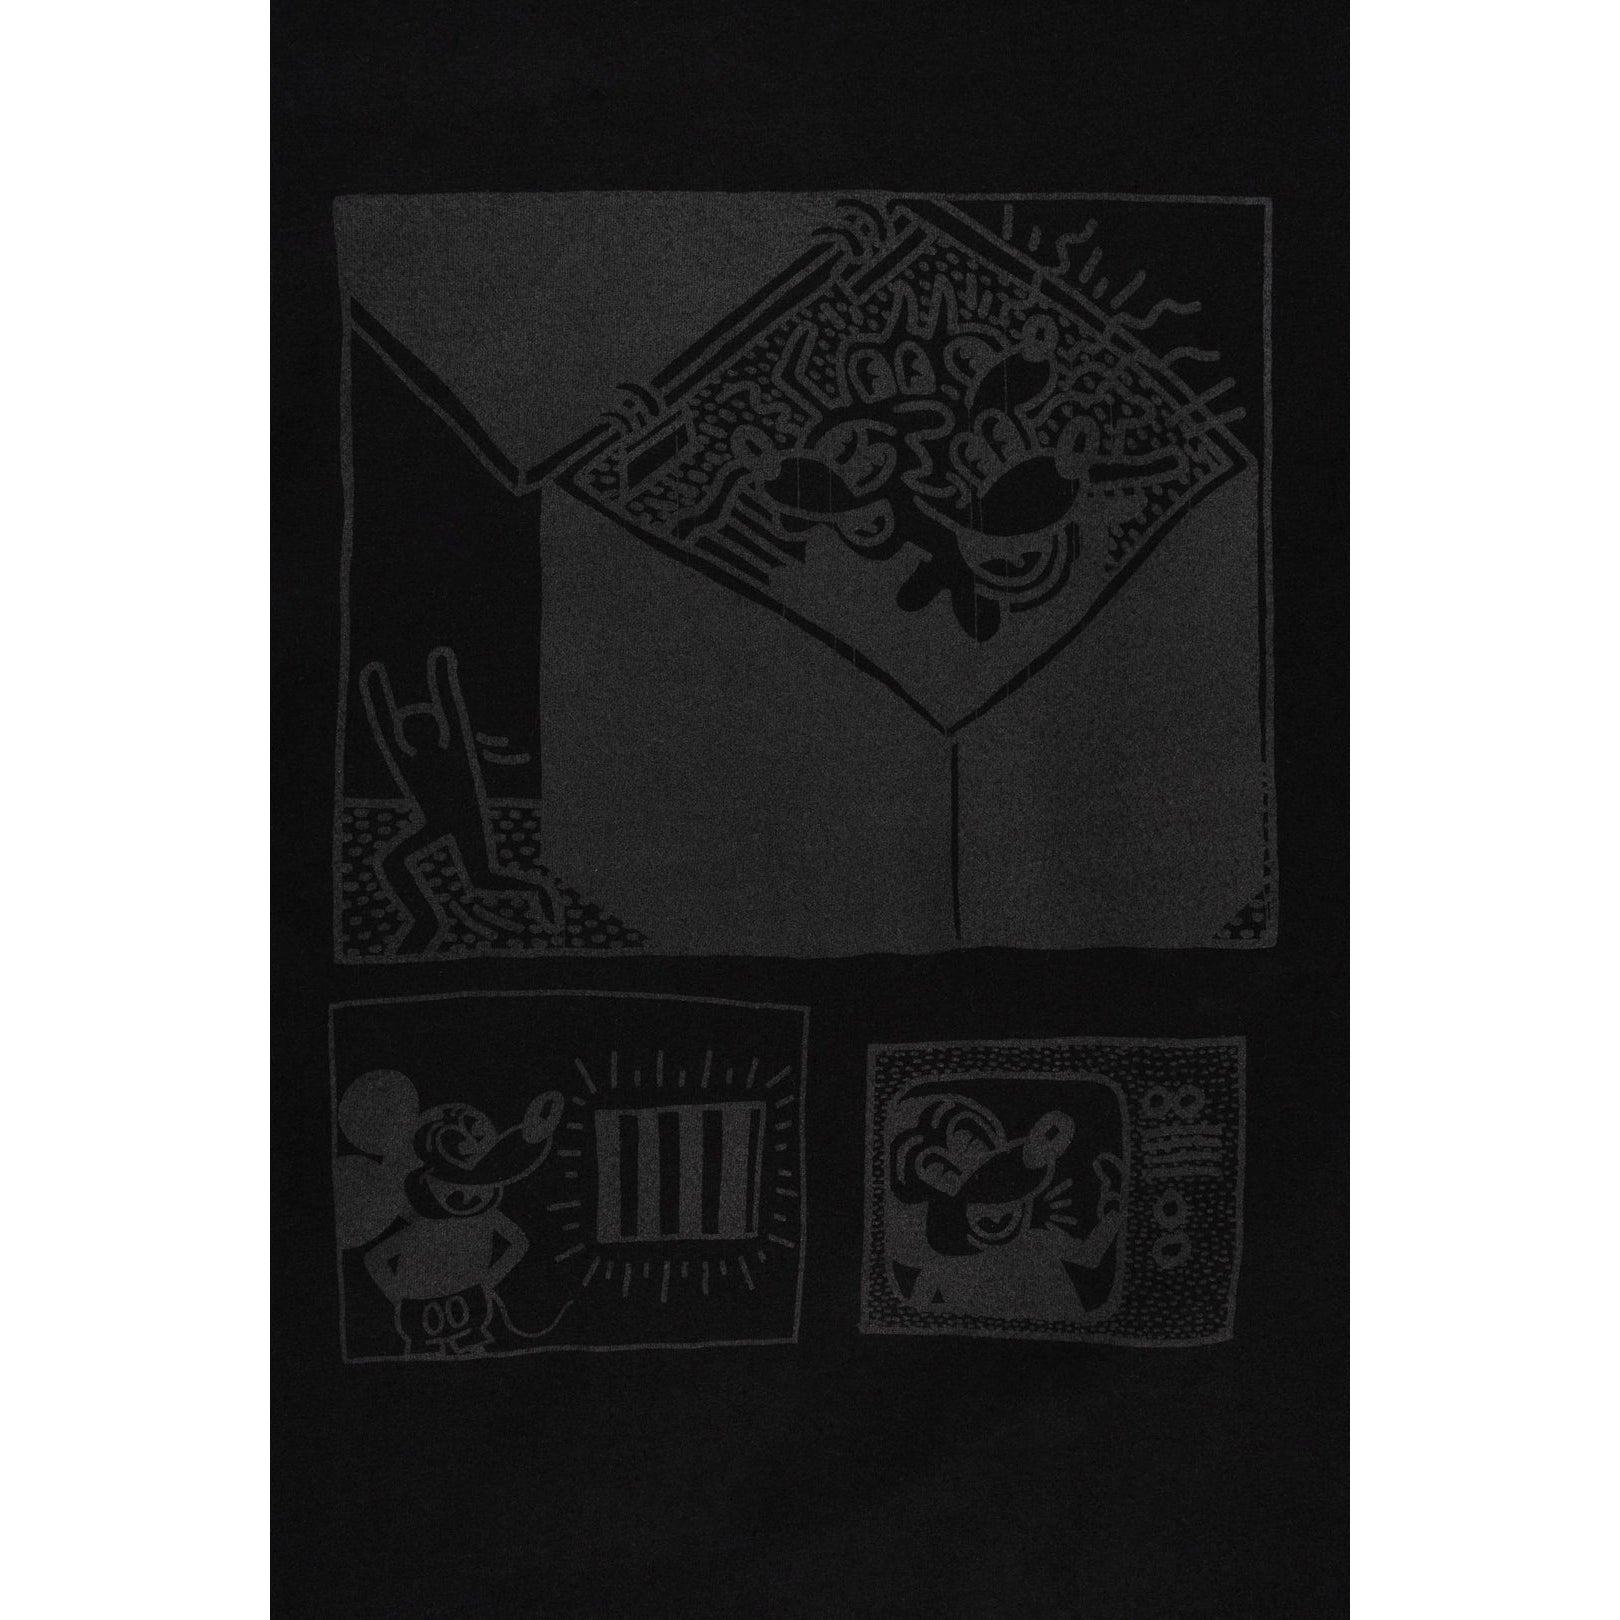 Example product title Men x Disney Mickey Mouse x Keith Haring Mickey and Haring Box Tee Black DSCMPA107-BLK - T-SHIRTS - Canada